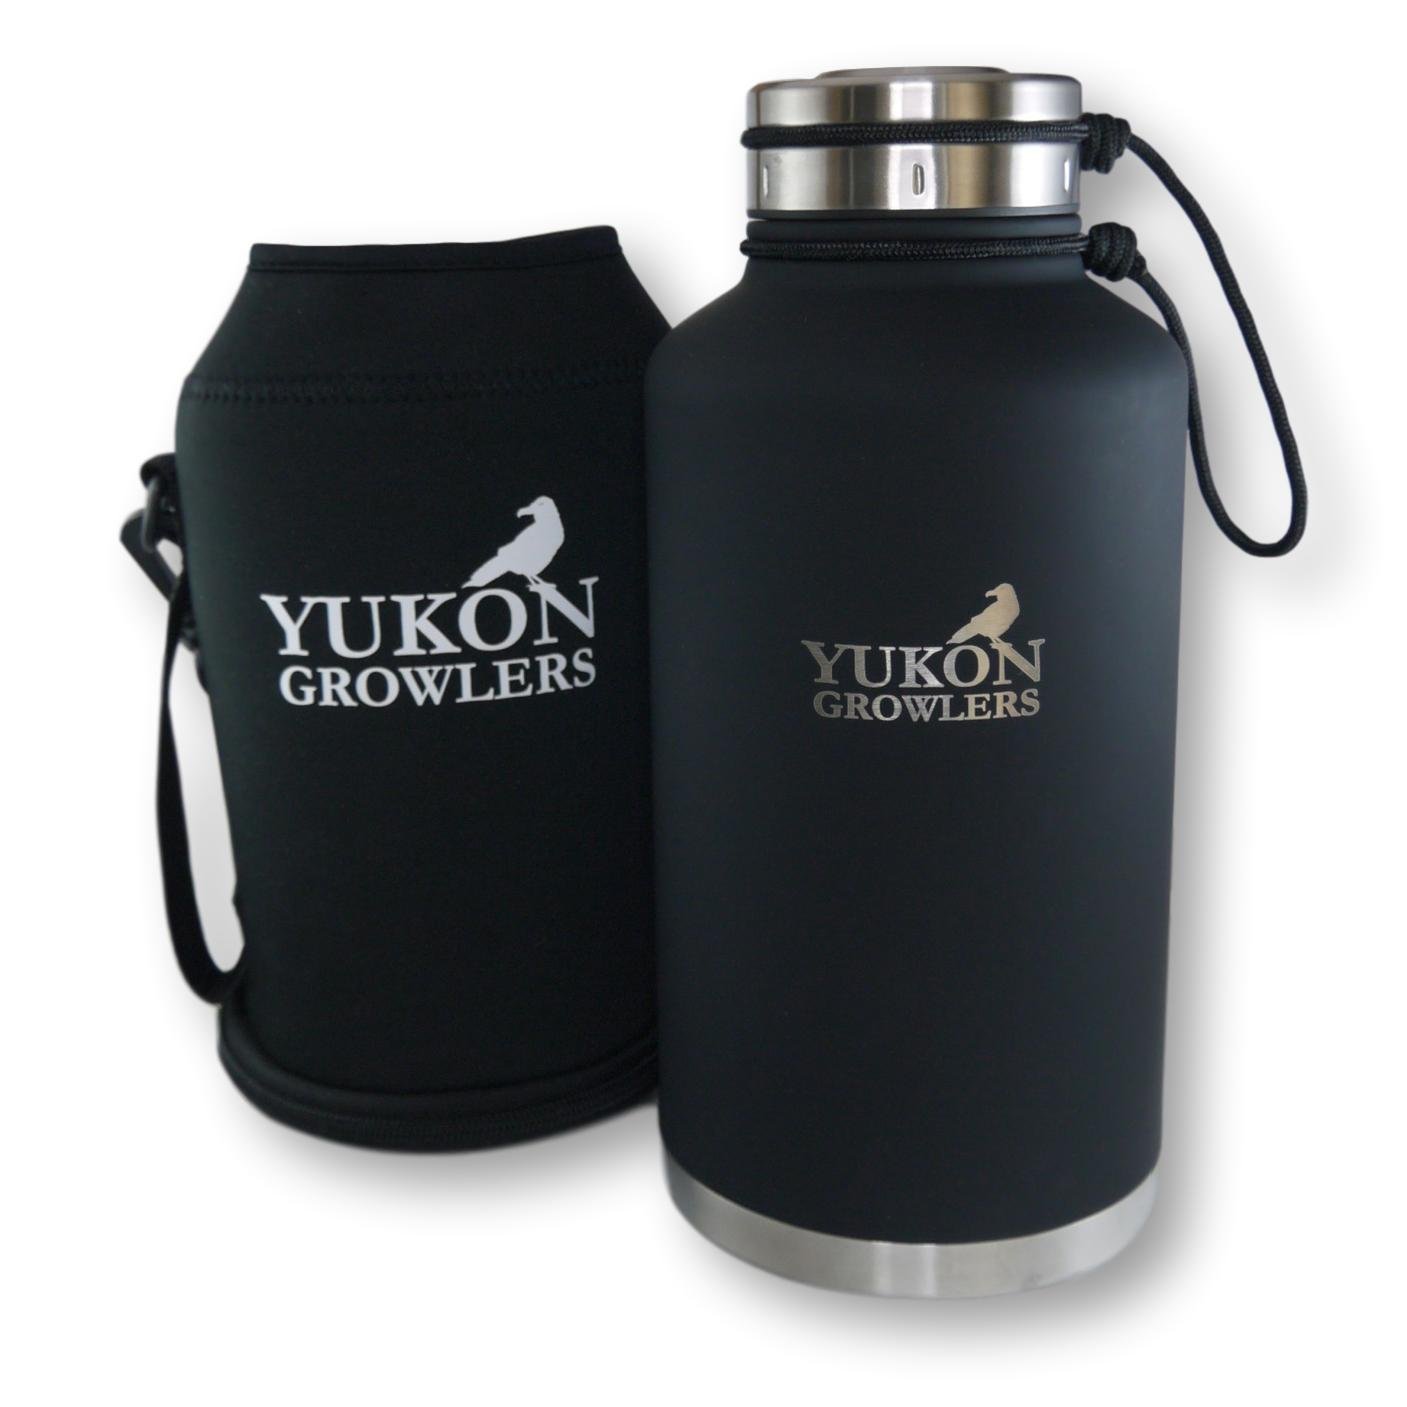 NEW IMPROVED Vacuum-Insulated Stainless Steel Growler - 64 oz